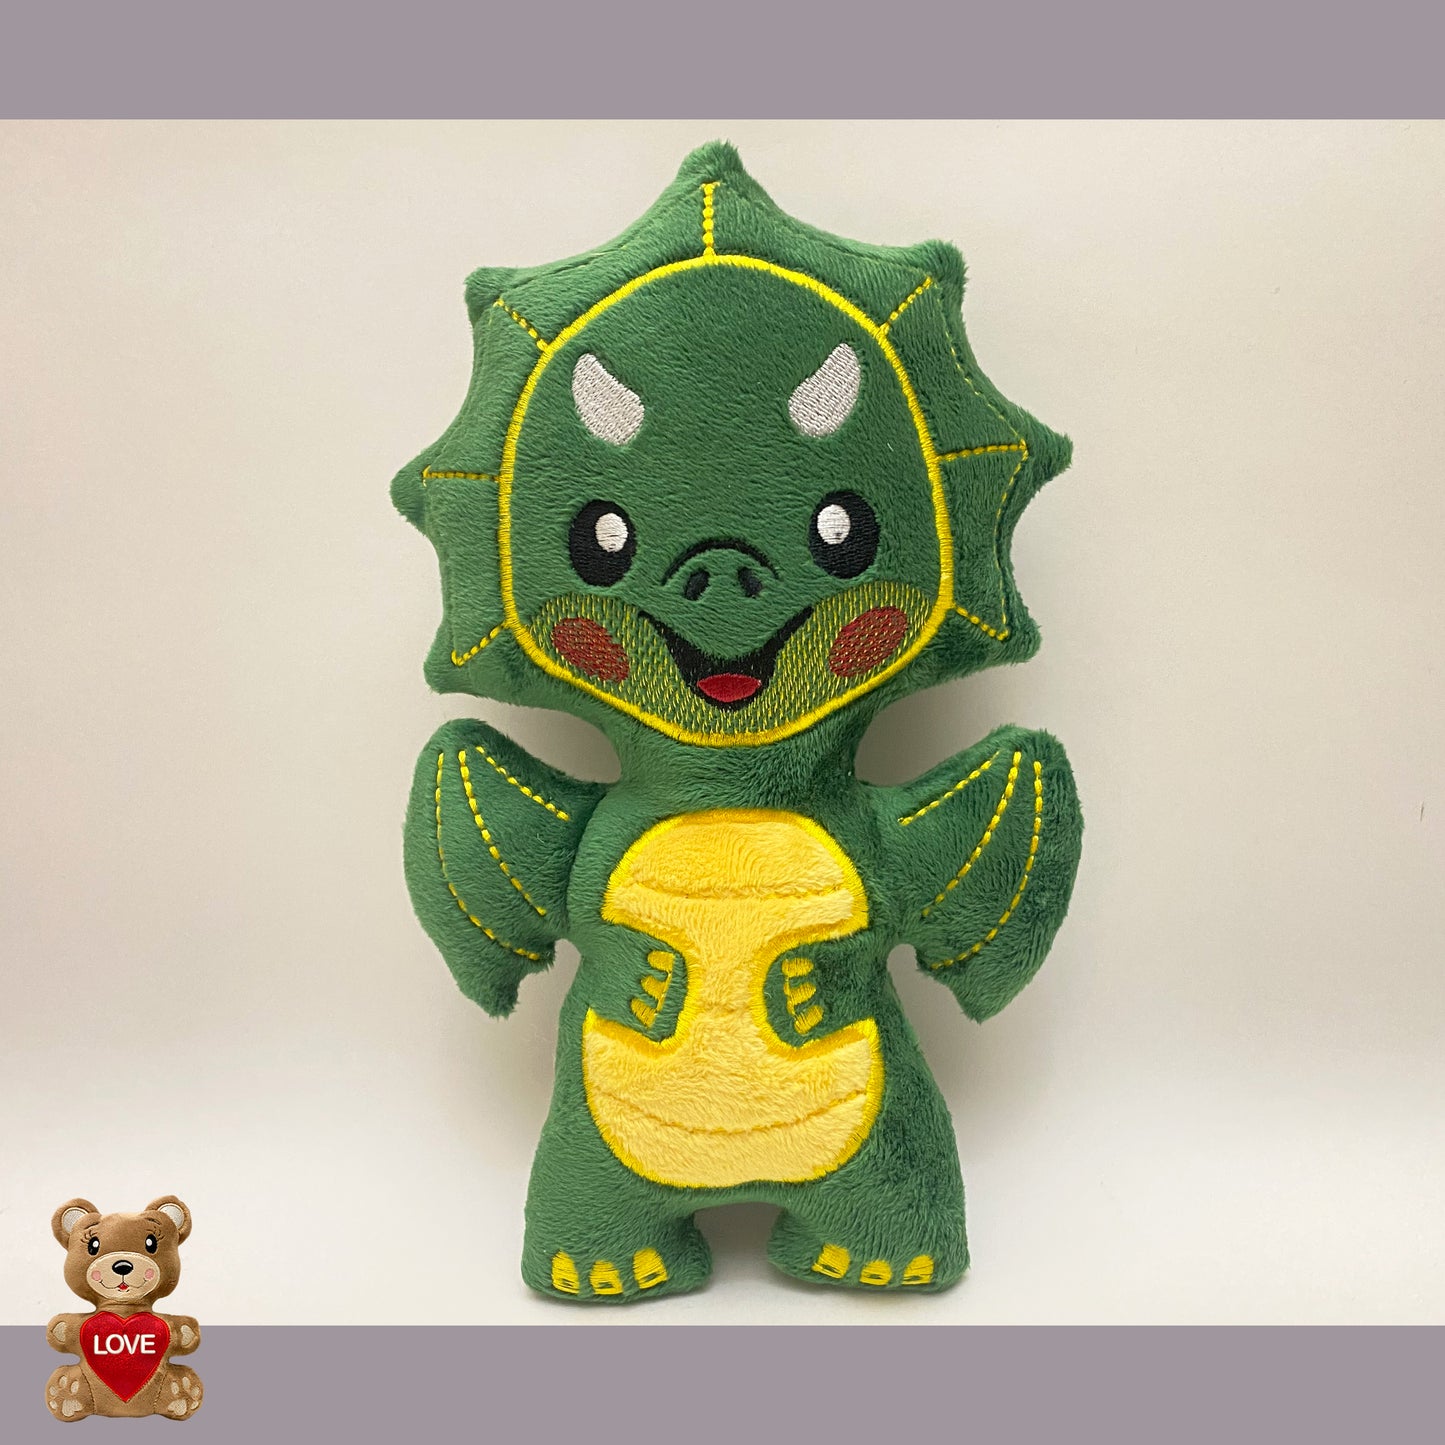 Personalised Green Dragon Stuffed toy ,Super cute personalised soft plush toy, Personalised Gift, Unique Personalized Birthday Gifts , Custom Gifts For Children